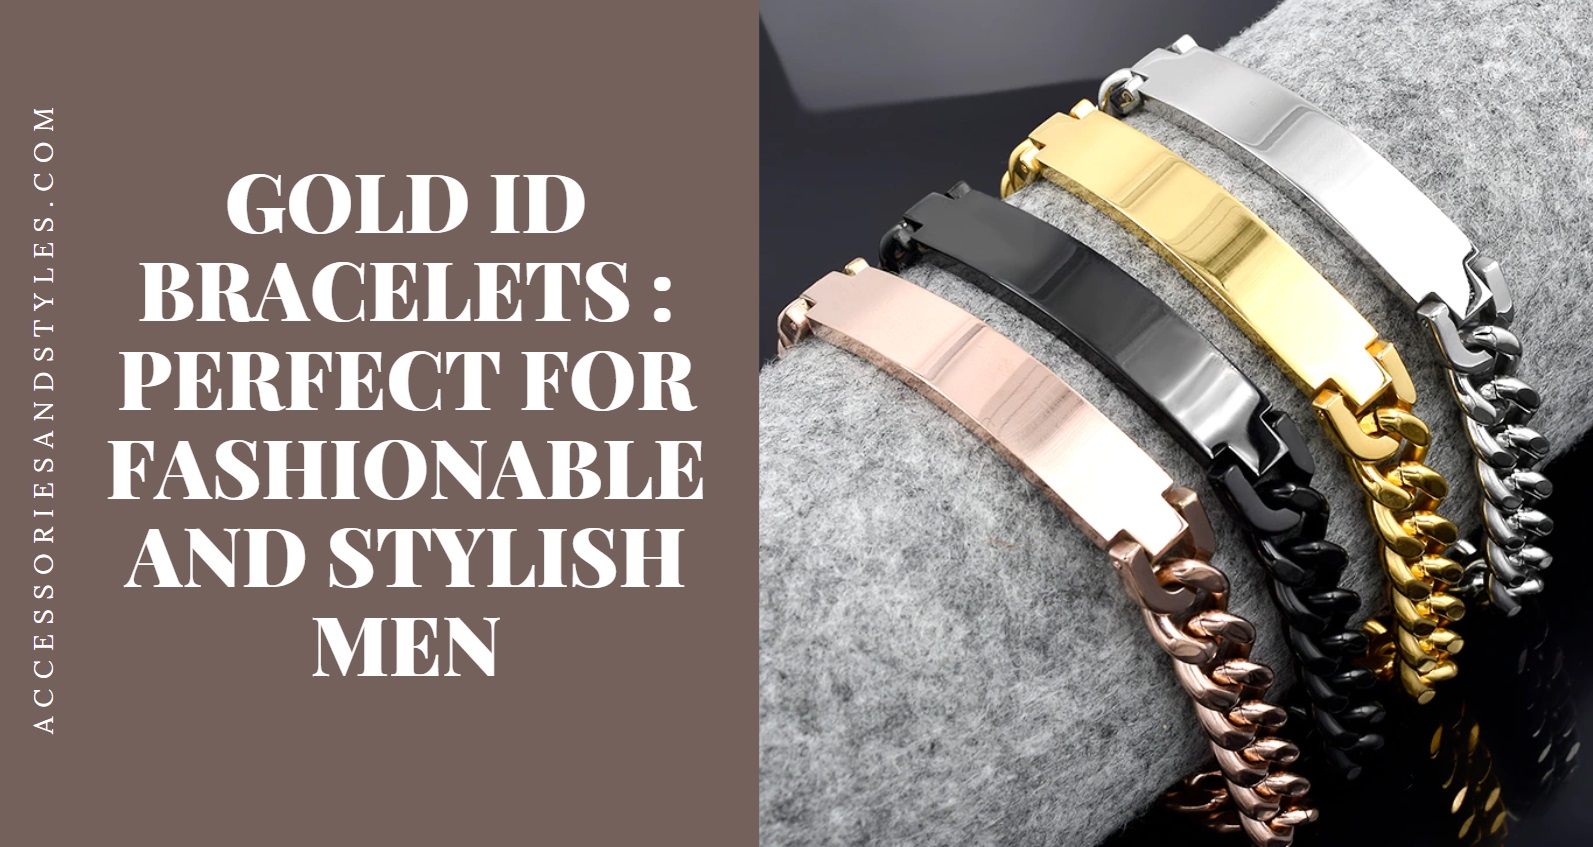 Gold ID Bracelets - Perfect For Fashionable And Stylish Men Like You: Accessories and Styles